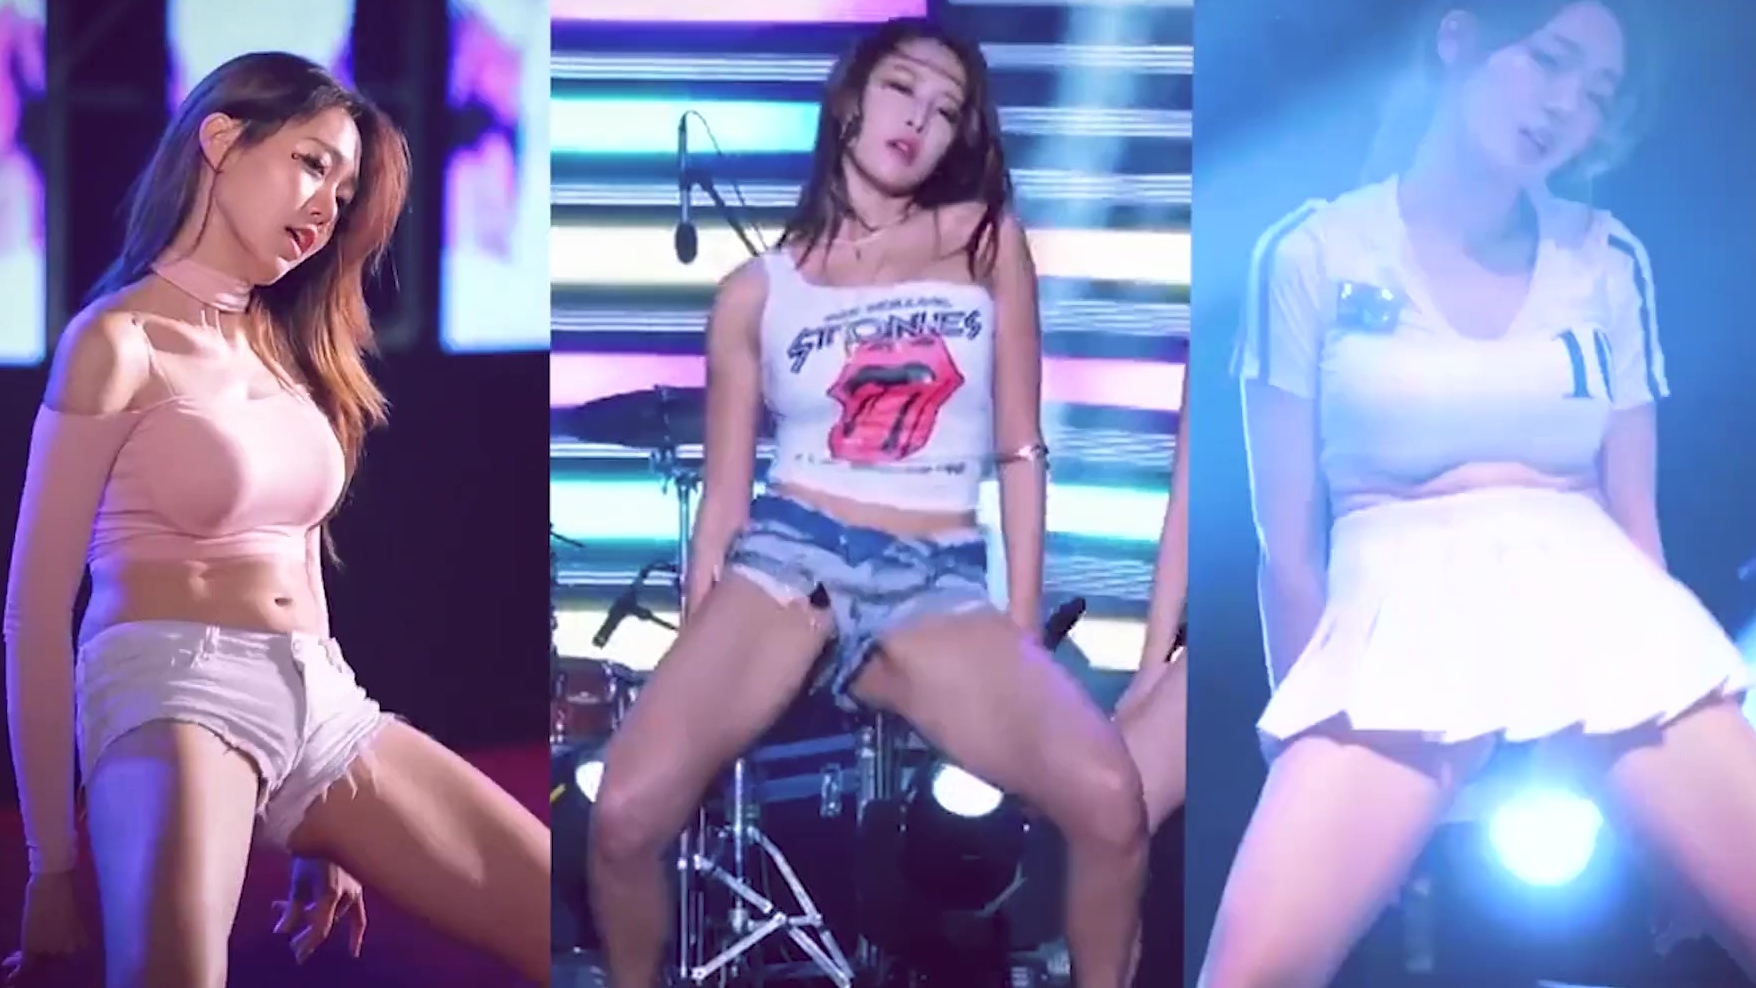 Dancing Girls teasing with Fit Bodies in Mixed K-Pop PMV Compilation pic